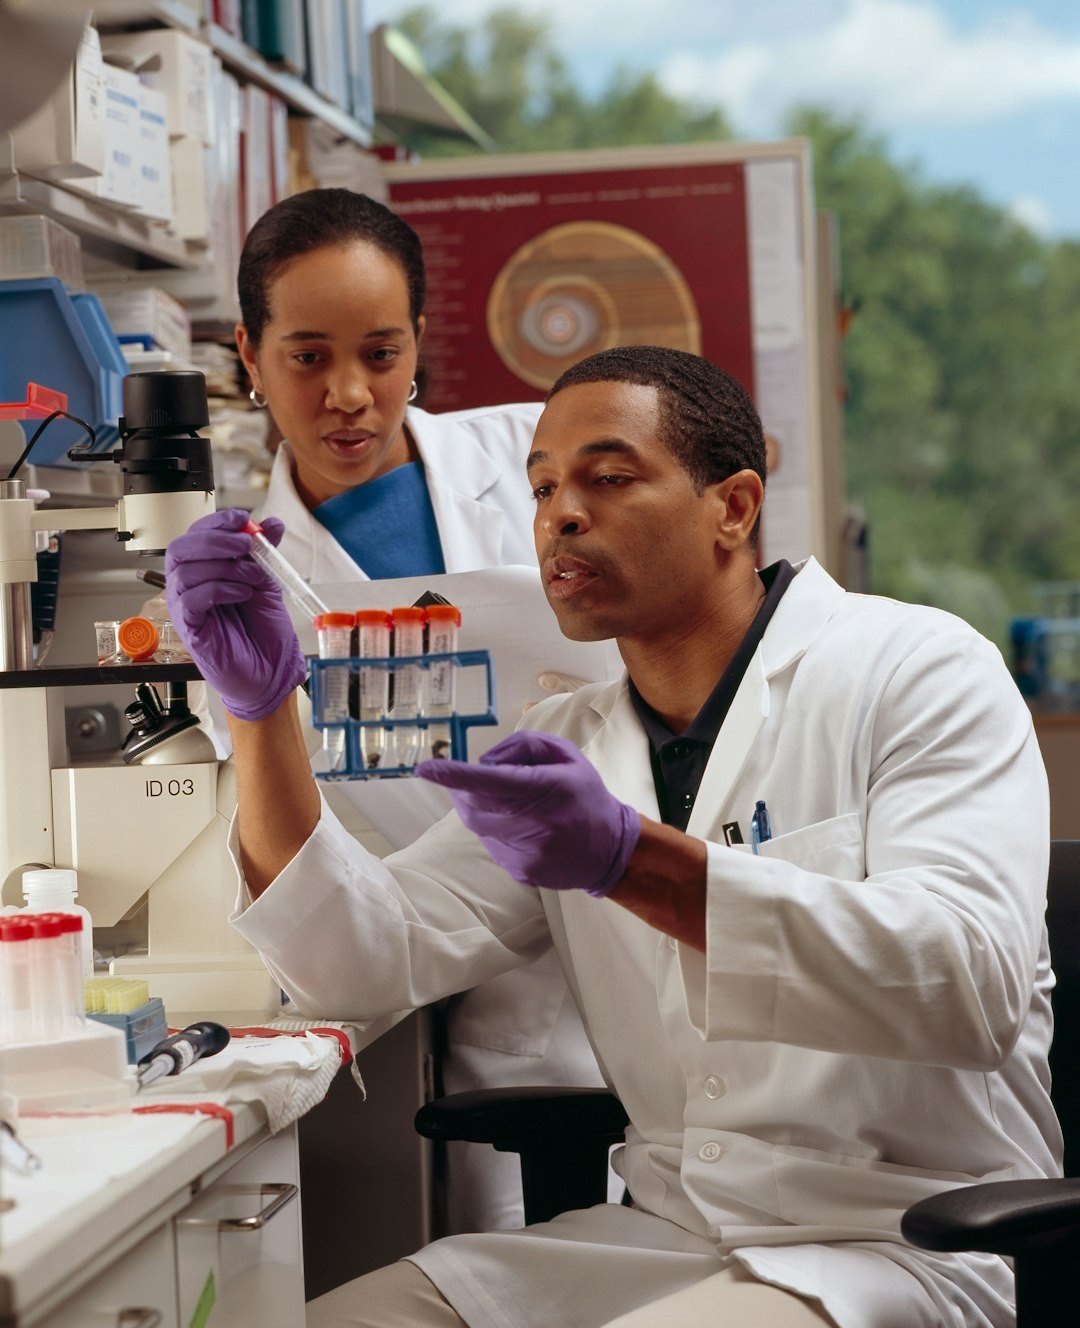 Researcher Checks Test Tubes. An African American male researcher checks test tubes as an AfricanAmerican female cancer researcher looks on.